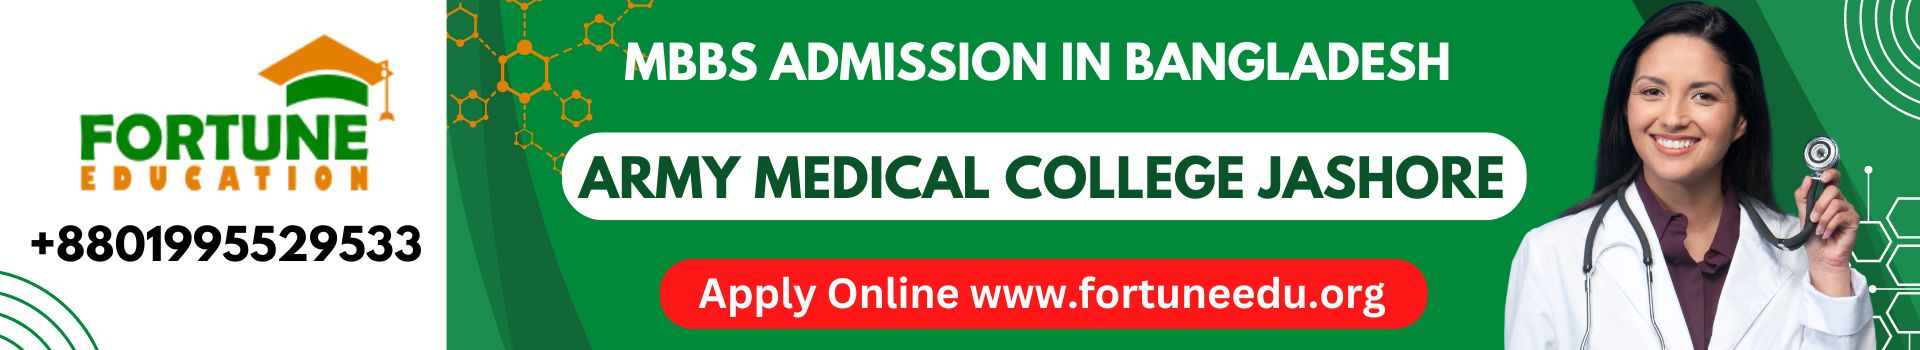 Army Medical College Jashore Banner